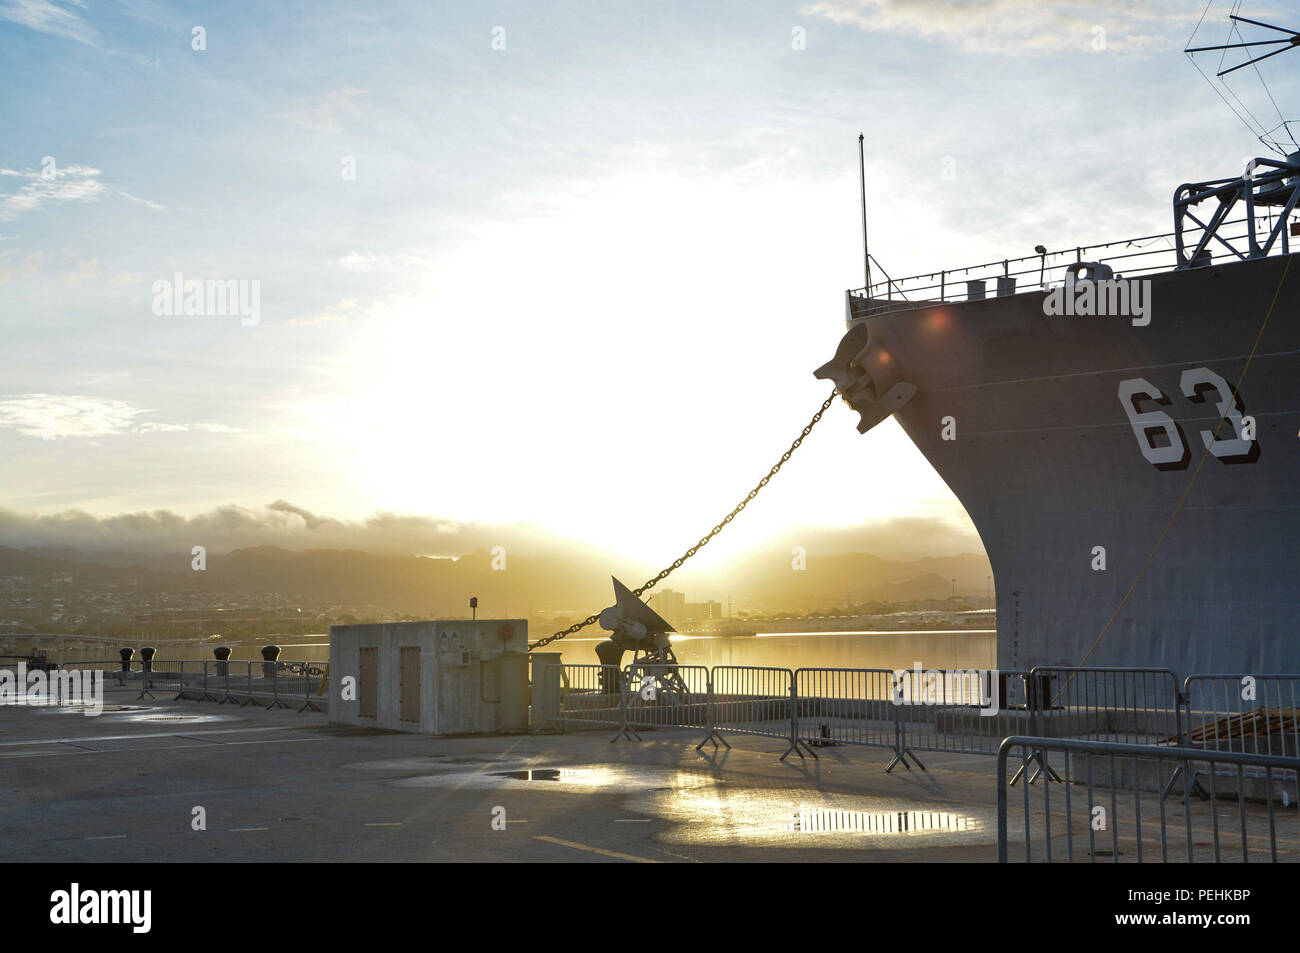 PEARL HARBOR (Aug. 25, 2015) The Battleship Missouri Memorial caught in the early morning light berth on Ford Island at Joint Base Pearl Harbor-Hickam, Aug 25. (U.S. Navy photo by Mass Communication Specialist 1st Class Meranda Keller/Released) (U.S. Navy photo by Mass Communication Specialist 1st Class Meranda Keller/Released) Stock Photo